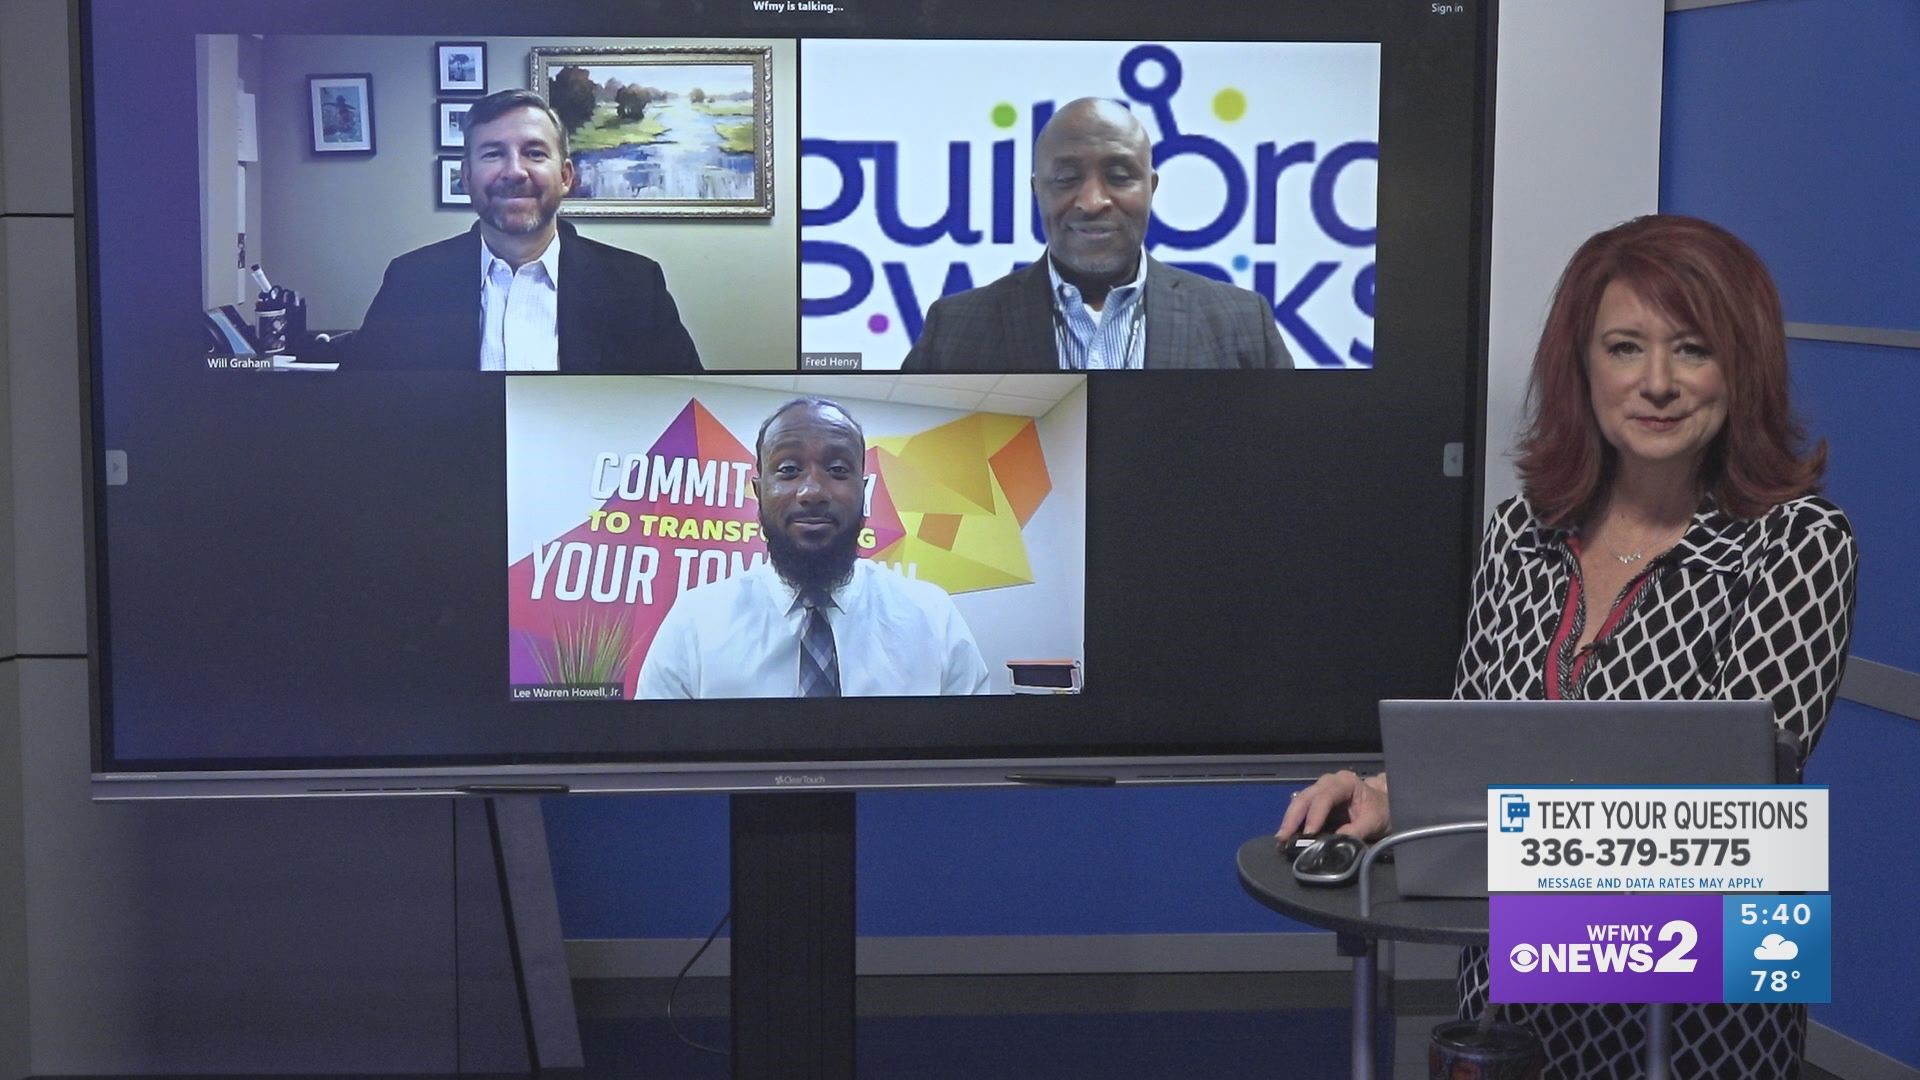 GuilfordWorks and Graham Personnel share advice to help you land the job you want.